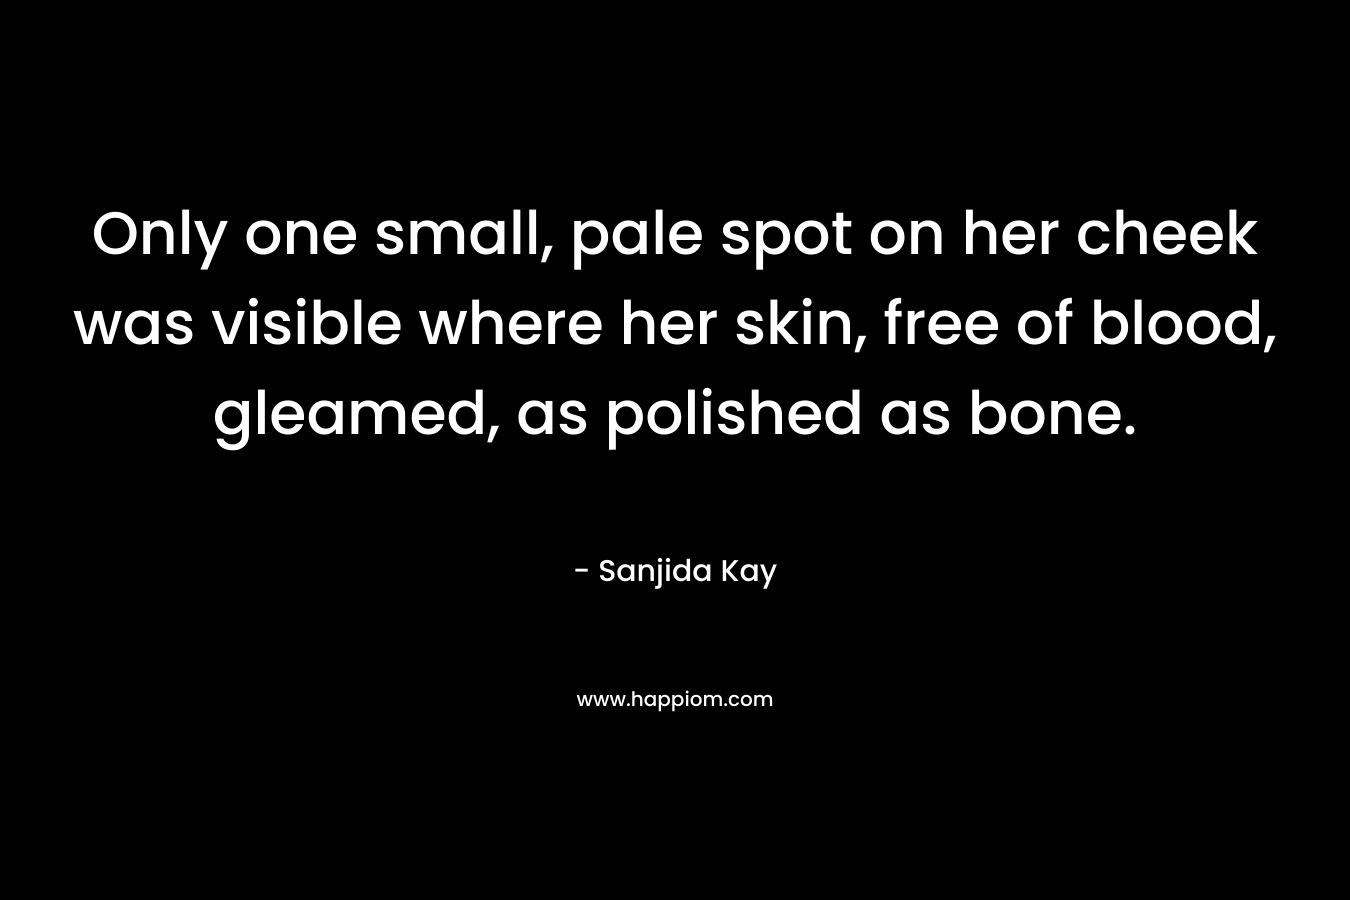 Only one small, pale spot on her cheek was visible where her skin, free of blood, gleamed, as polished as bone. – Sanjida Kay